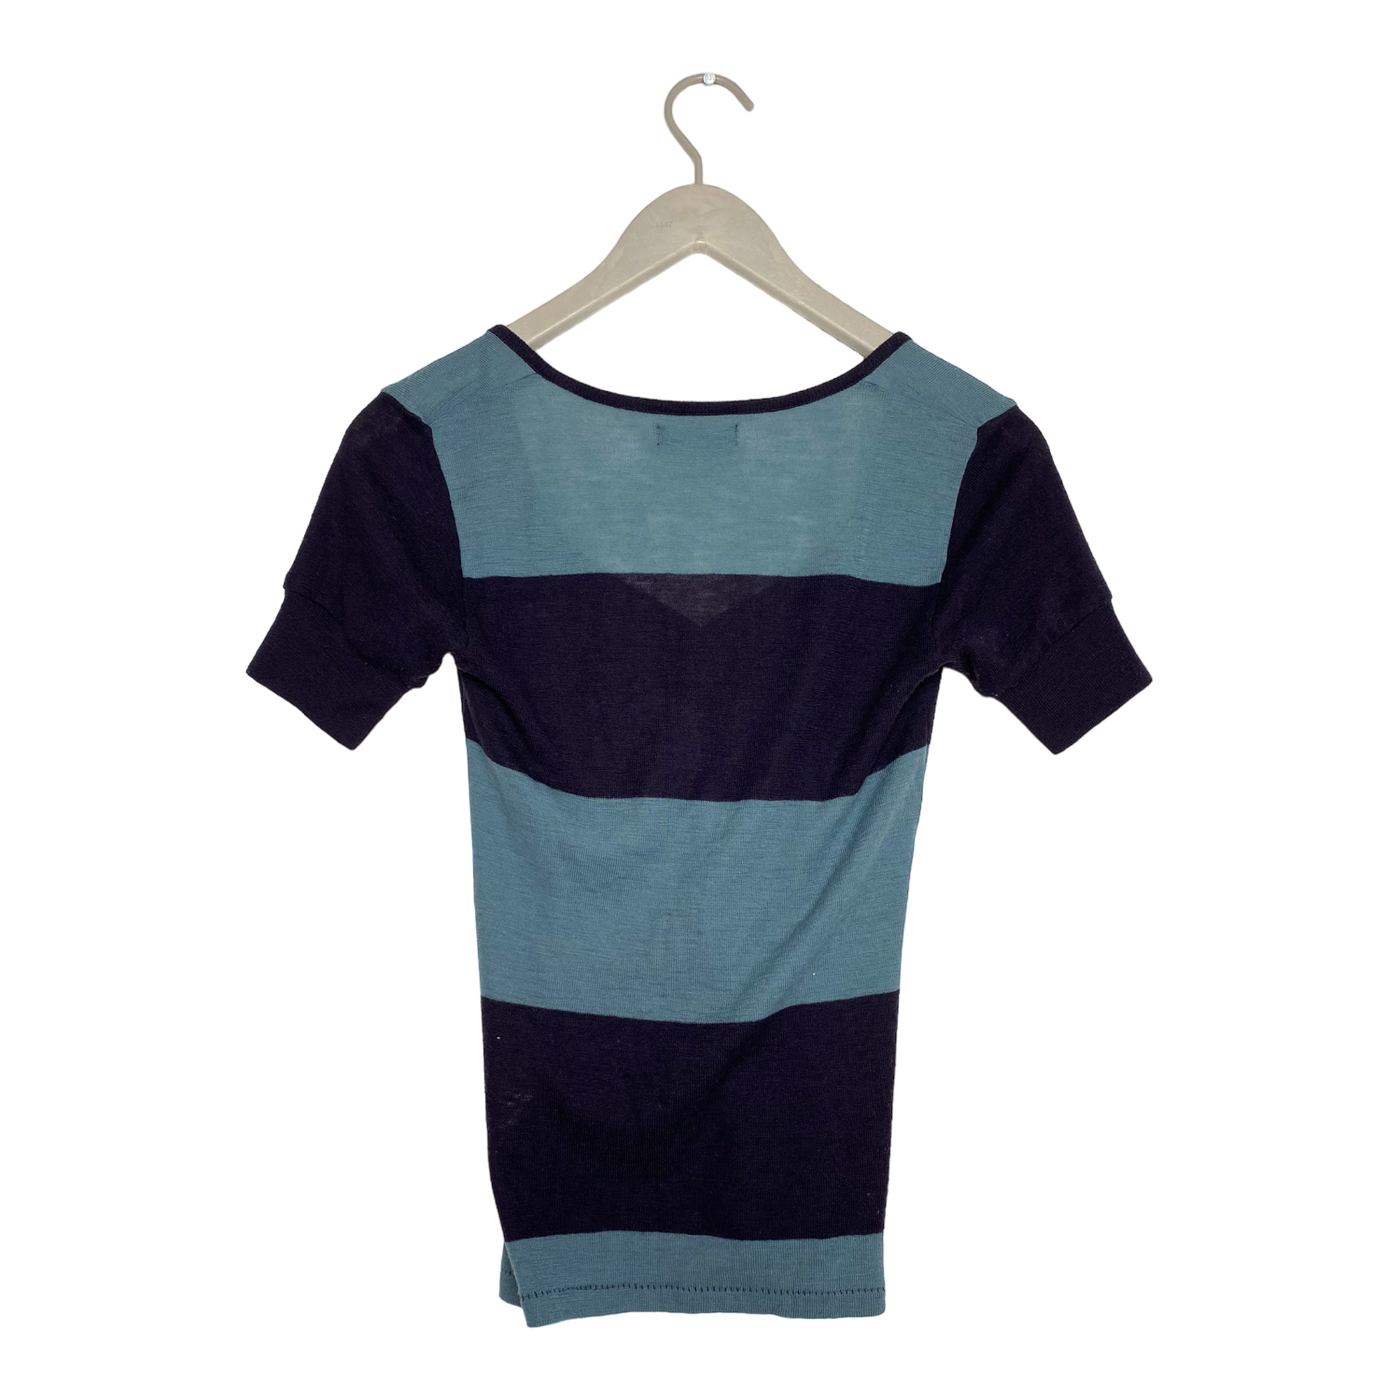 Acne Studios knit t-shirt, turquoise/midnight blue | woman S